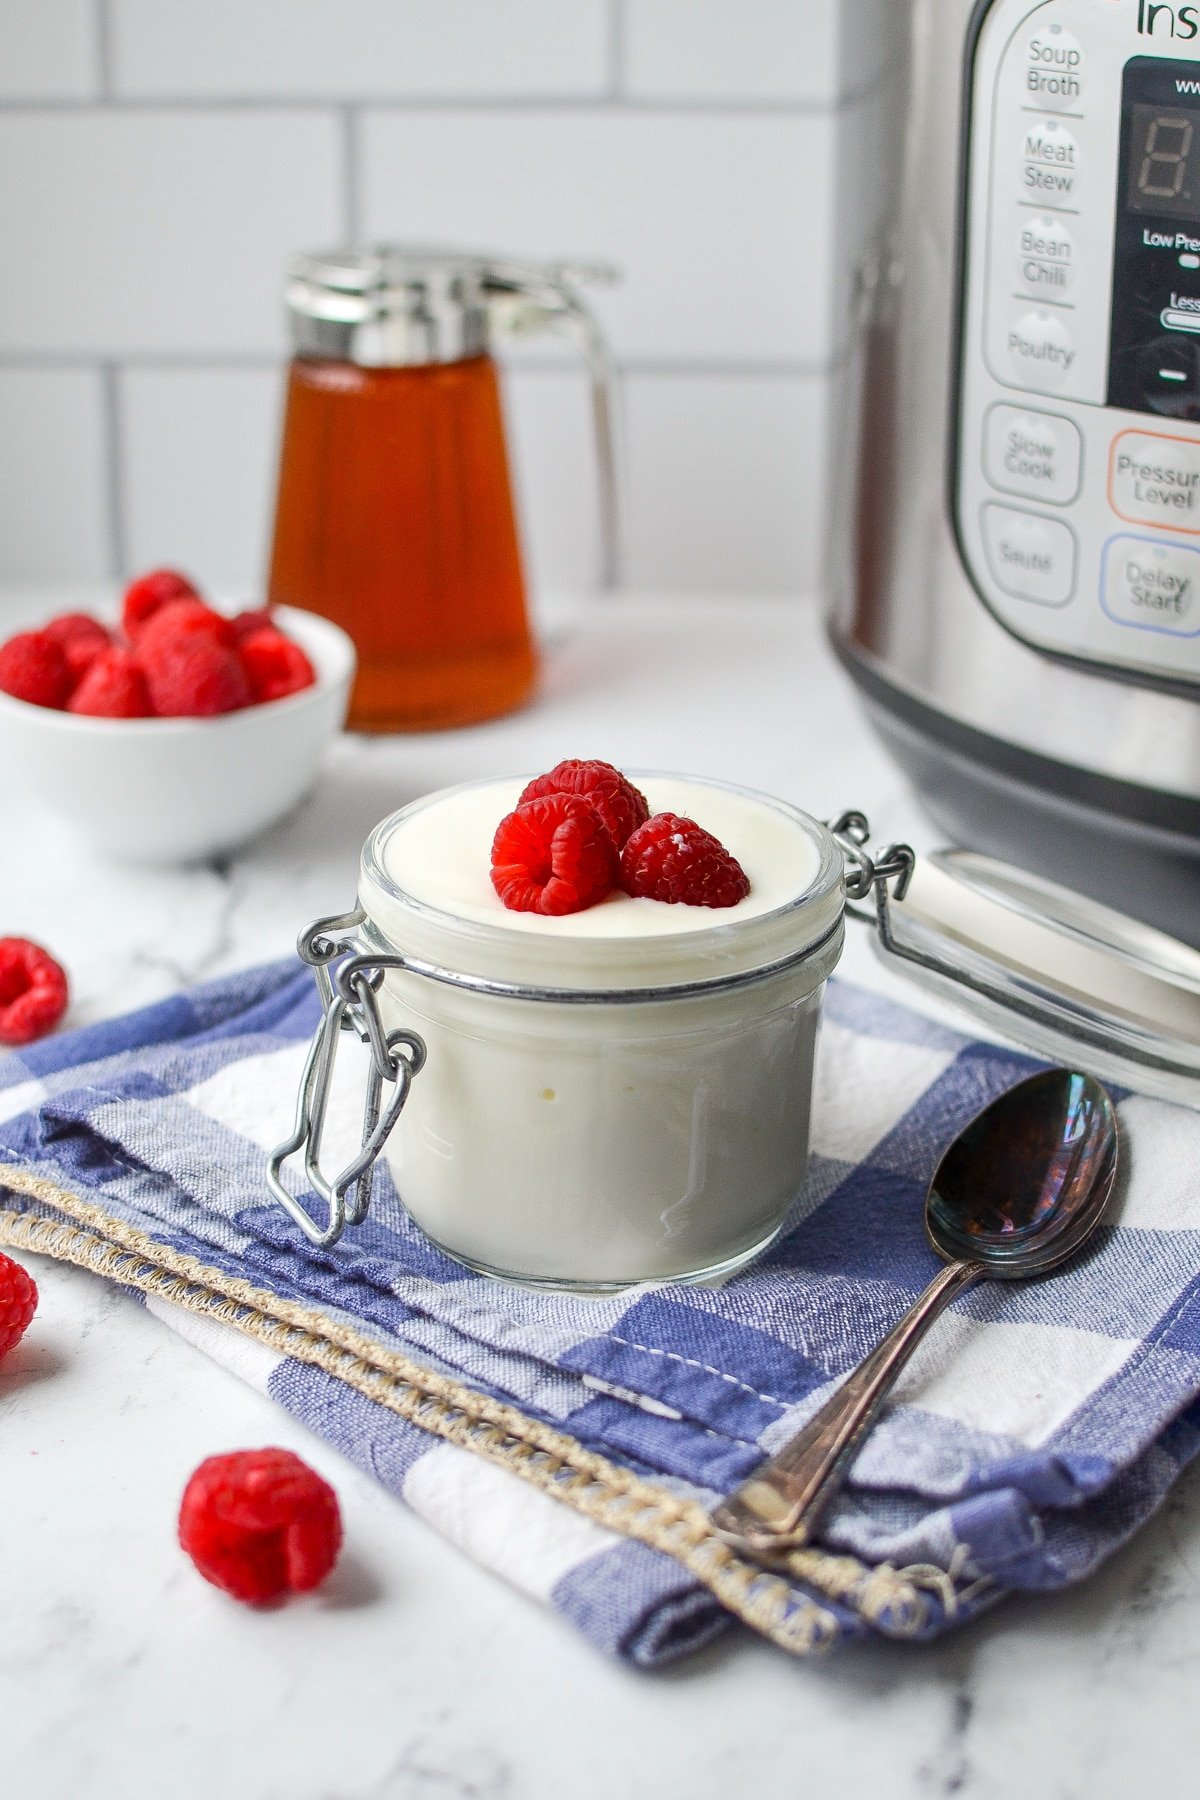 A small glass jar filled with yogurt and topped with fresh raspberries.